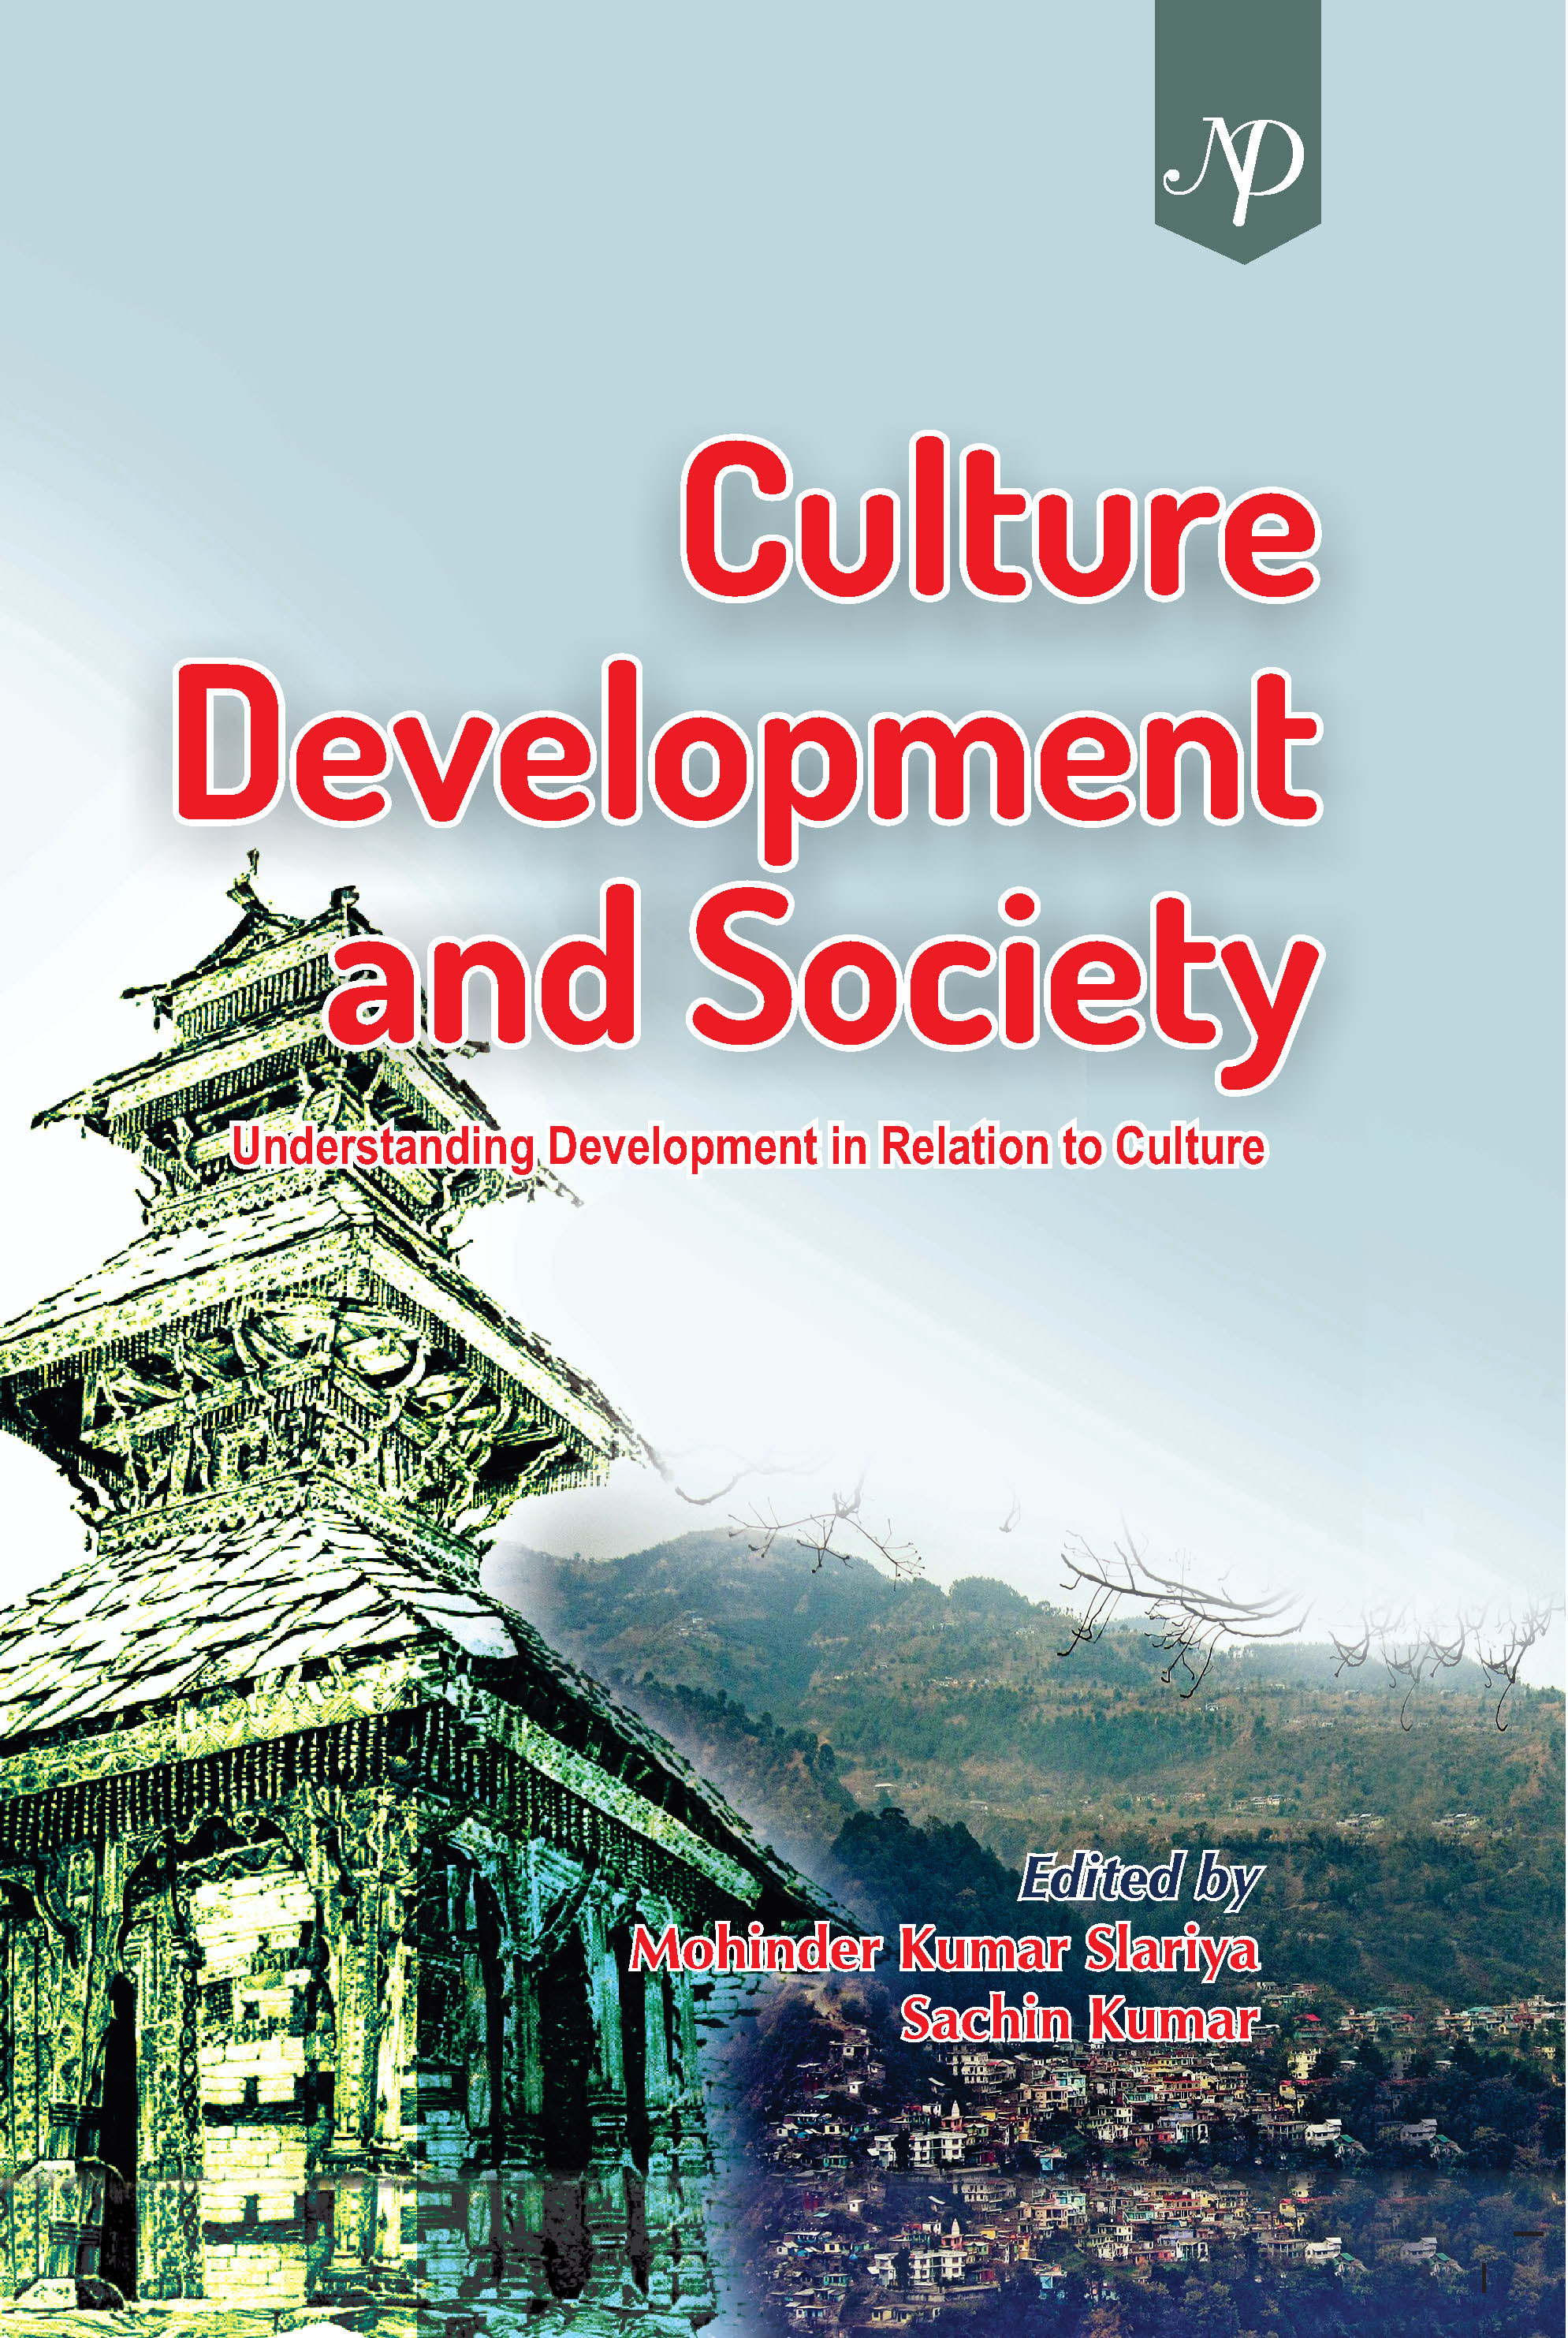 Culture, Development and Society Cover.jpg